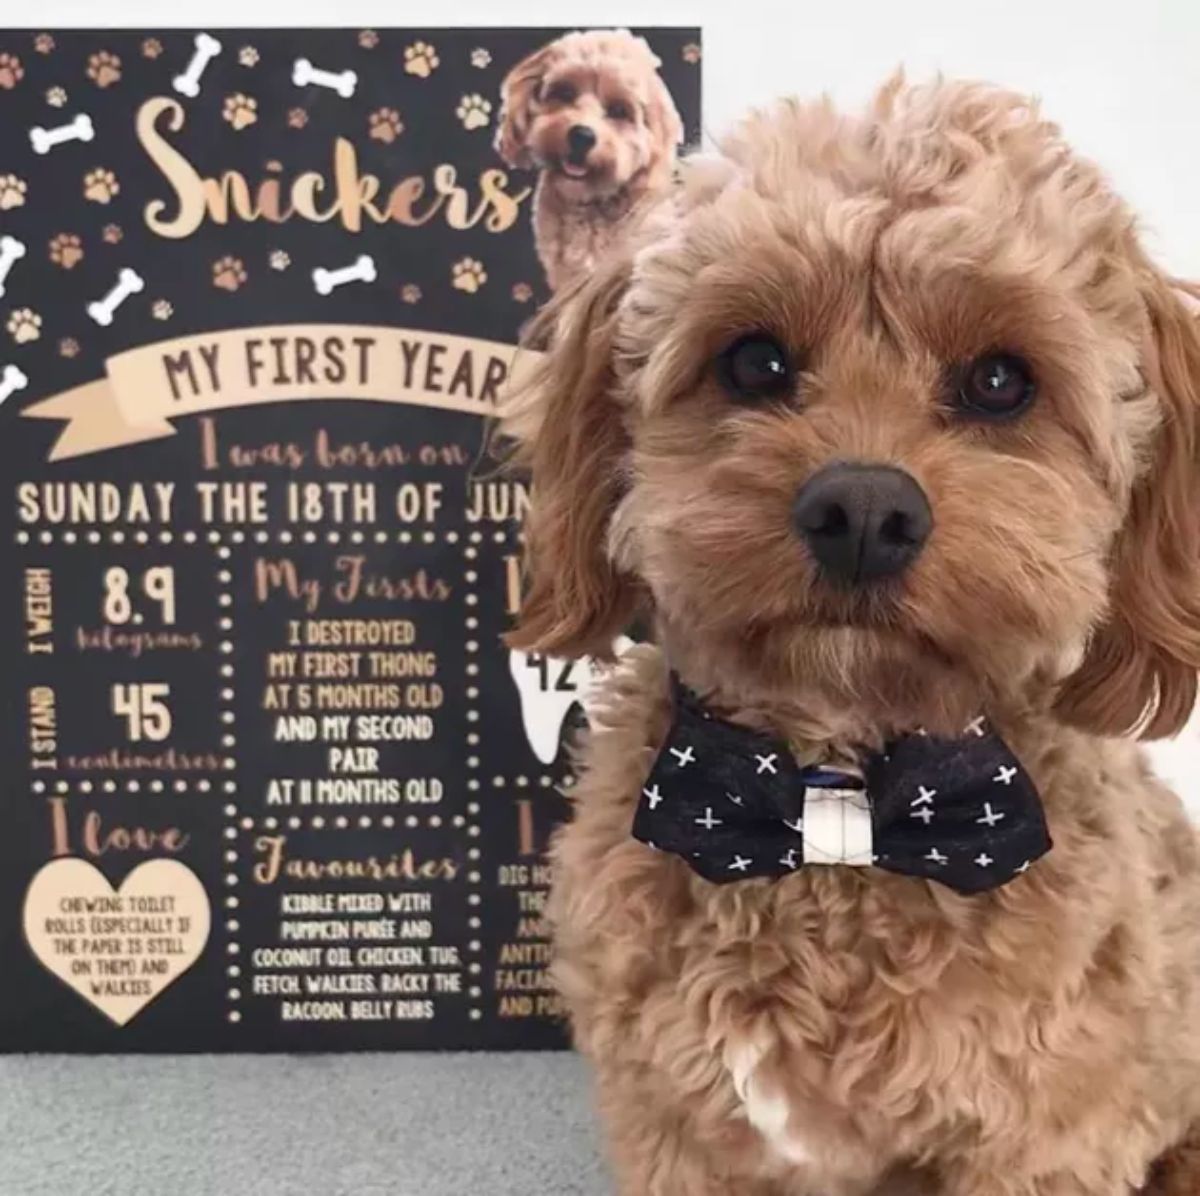 brown poodle puppy with a black and white bowtie in front of a board giving details about the dog's first year